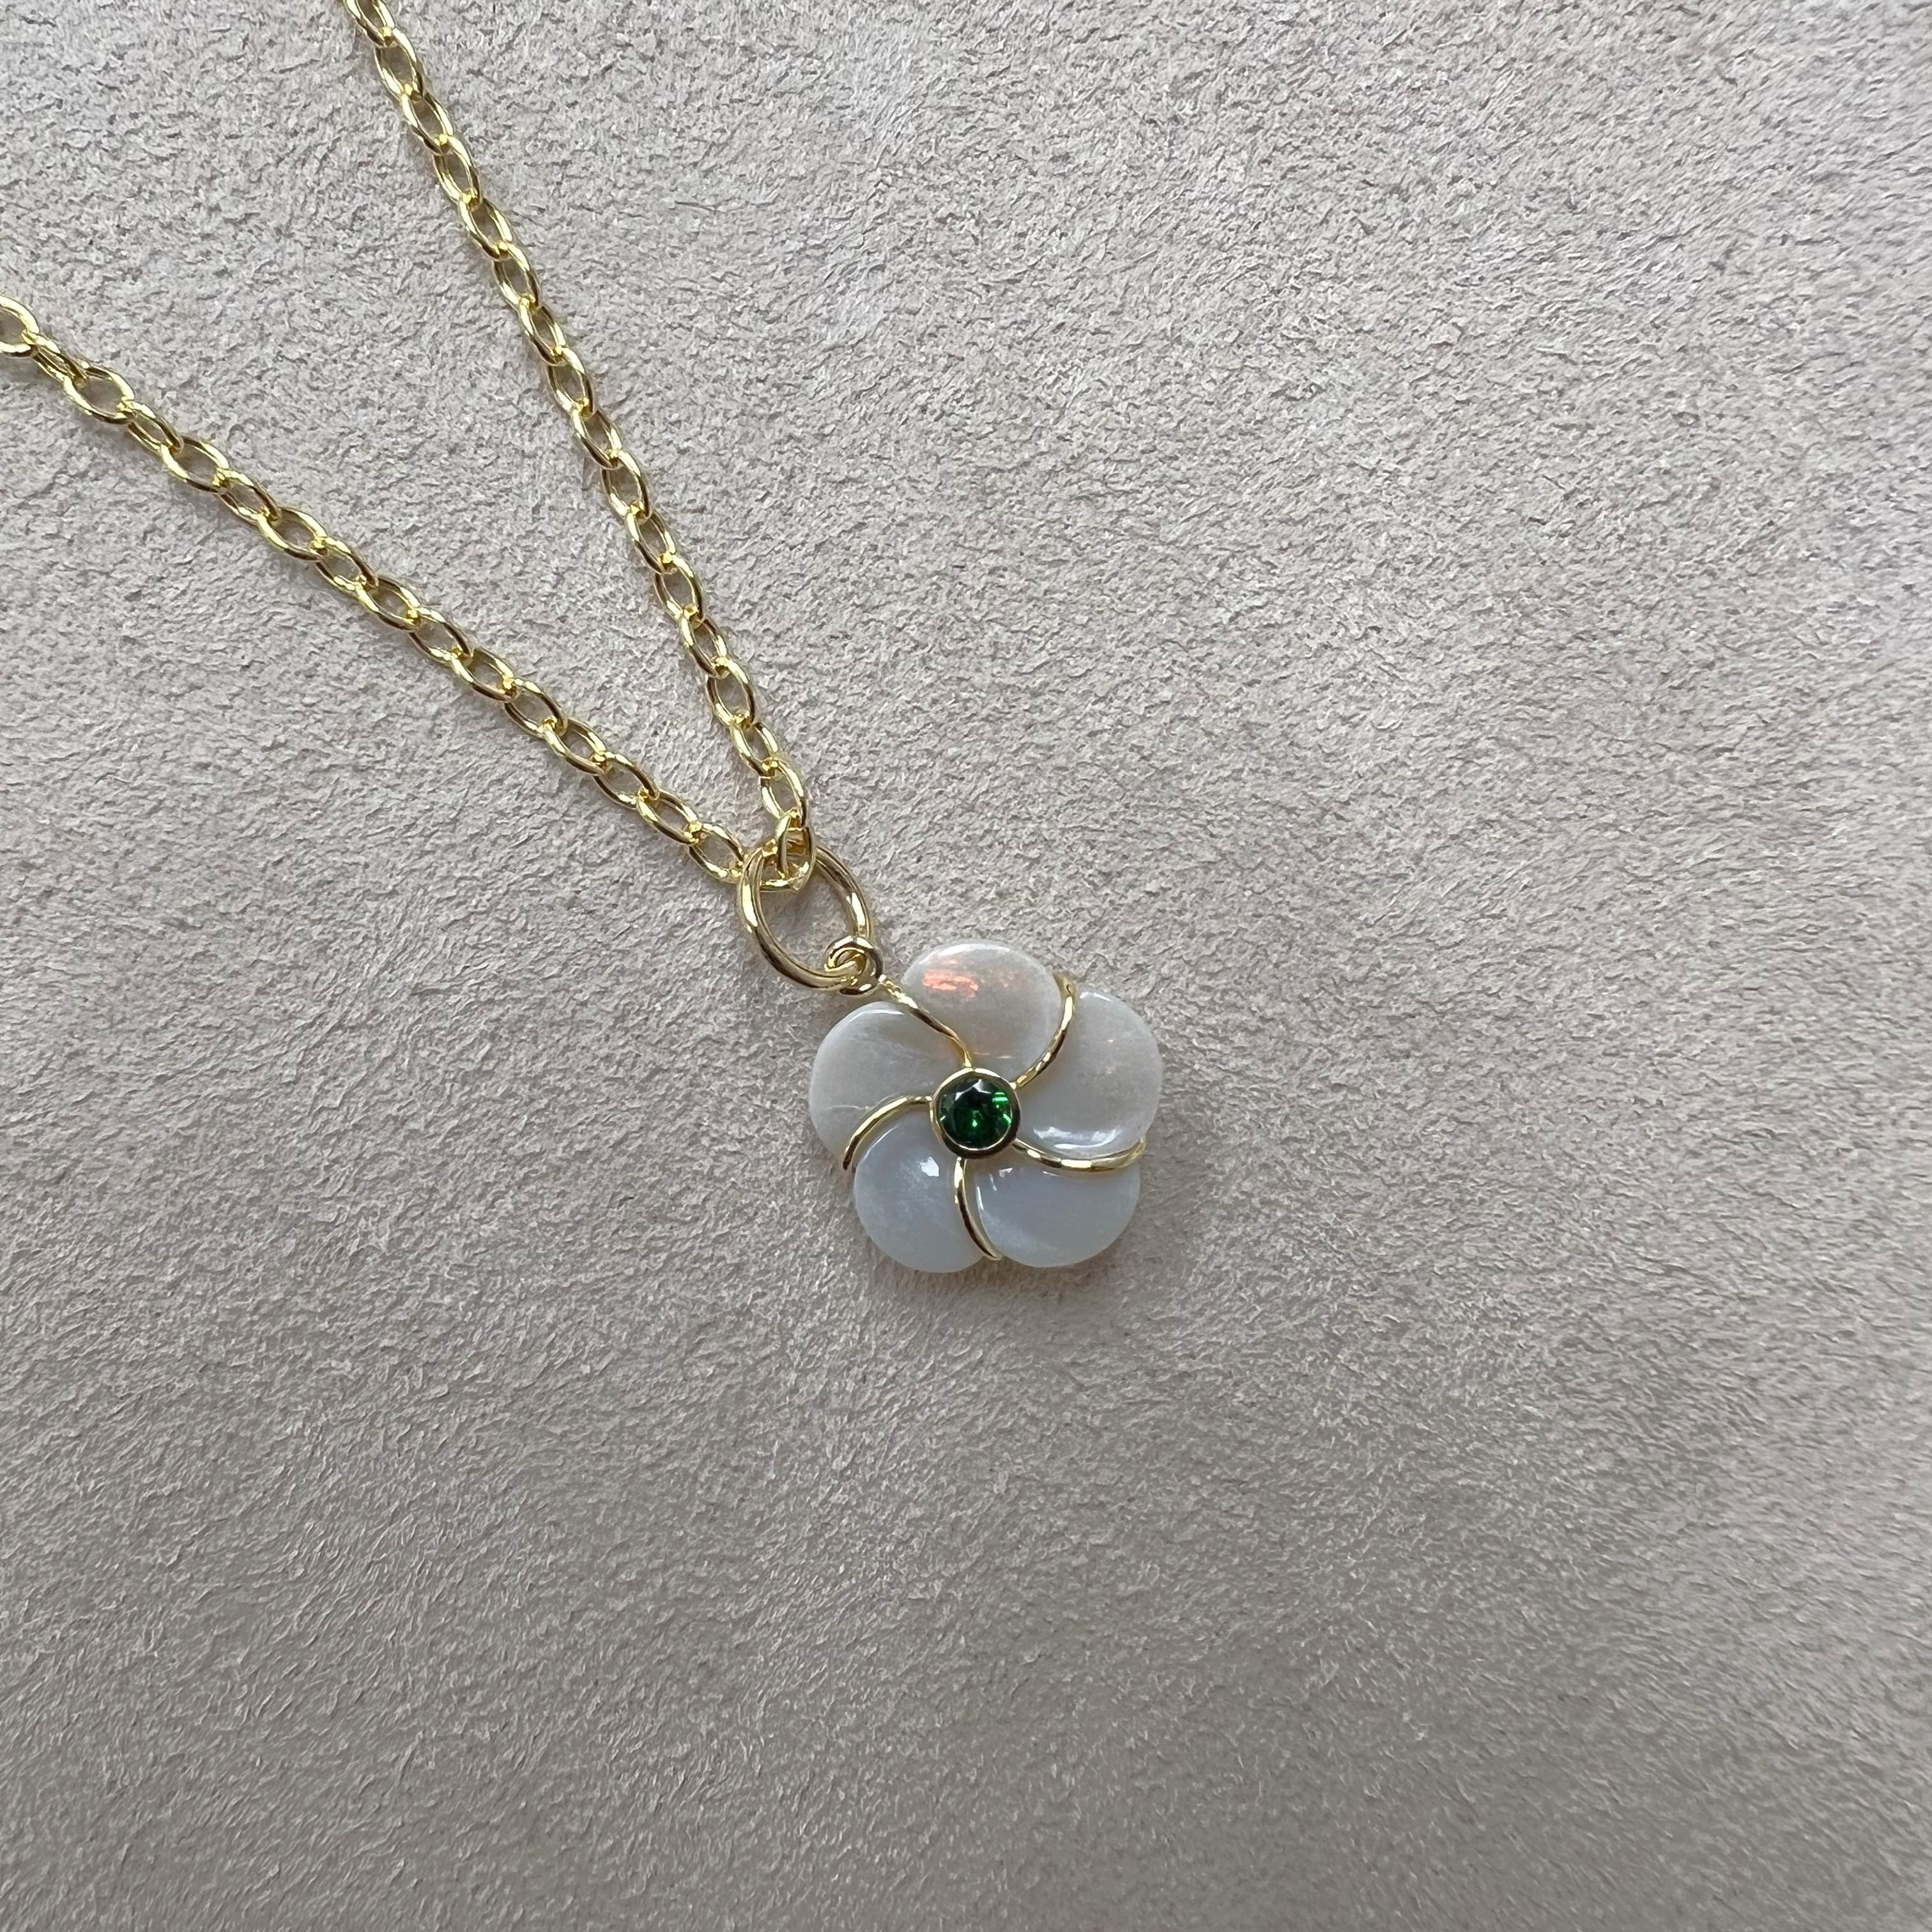 Created in 18 karat yellow gold
Opal 4 carats approx.
Tsavorite 0.10 carat approx.
Limited edition
Chain sold separately


 About the Designers ~ Dharmesh & Namrata

Drawing inspiration from little things, Dharmesh & Namrata Kothari have created an